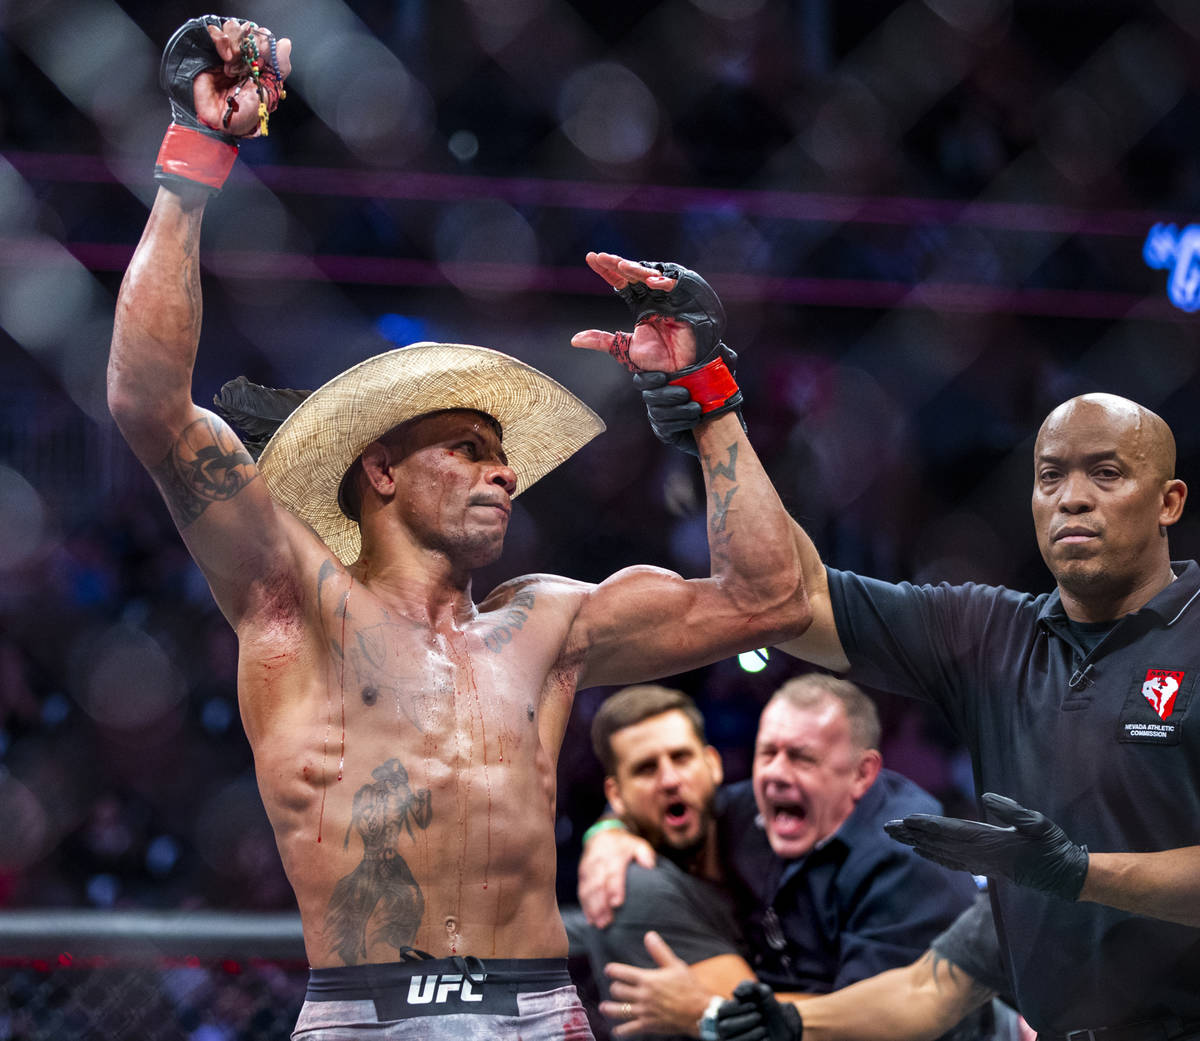 Welterweight Alex Oliveira celebrates his win after battling Max Griffin during their UFC 248 f ...